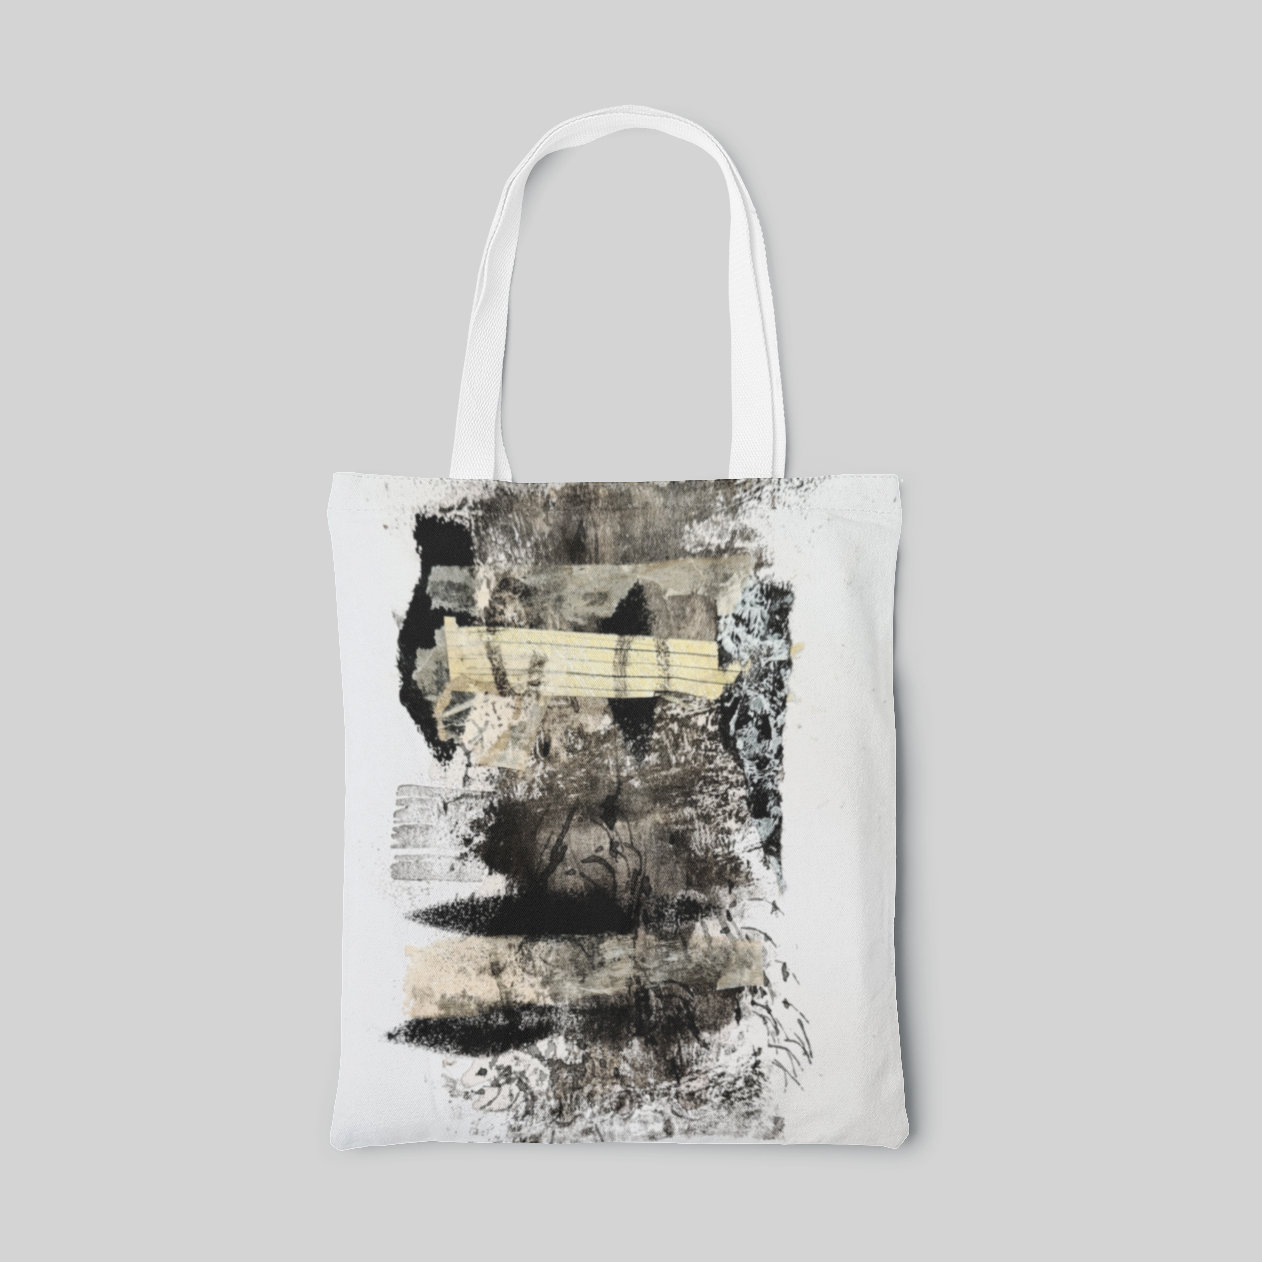 white abstract designed tote bag with a collage with various self-made papers, stamps, textures, ink painting and coffee extract to represent the dazzling Earth, front side